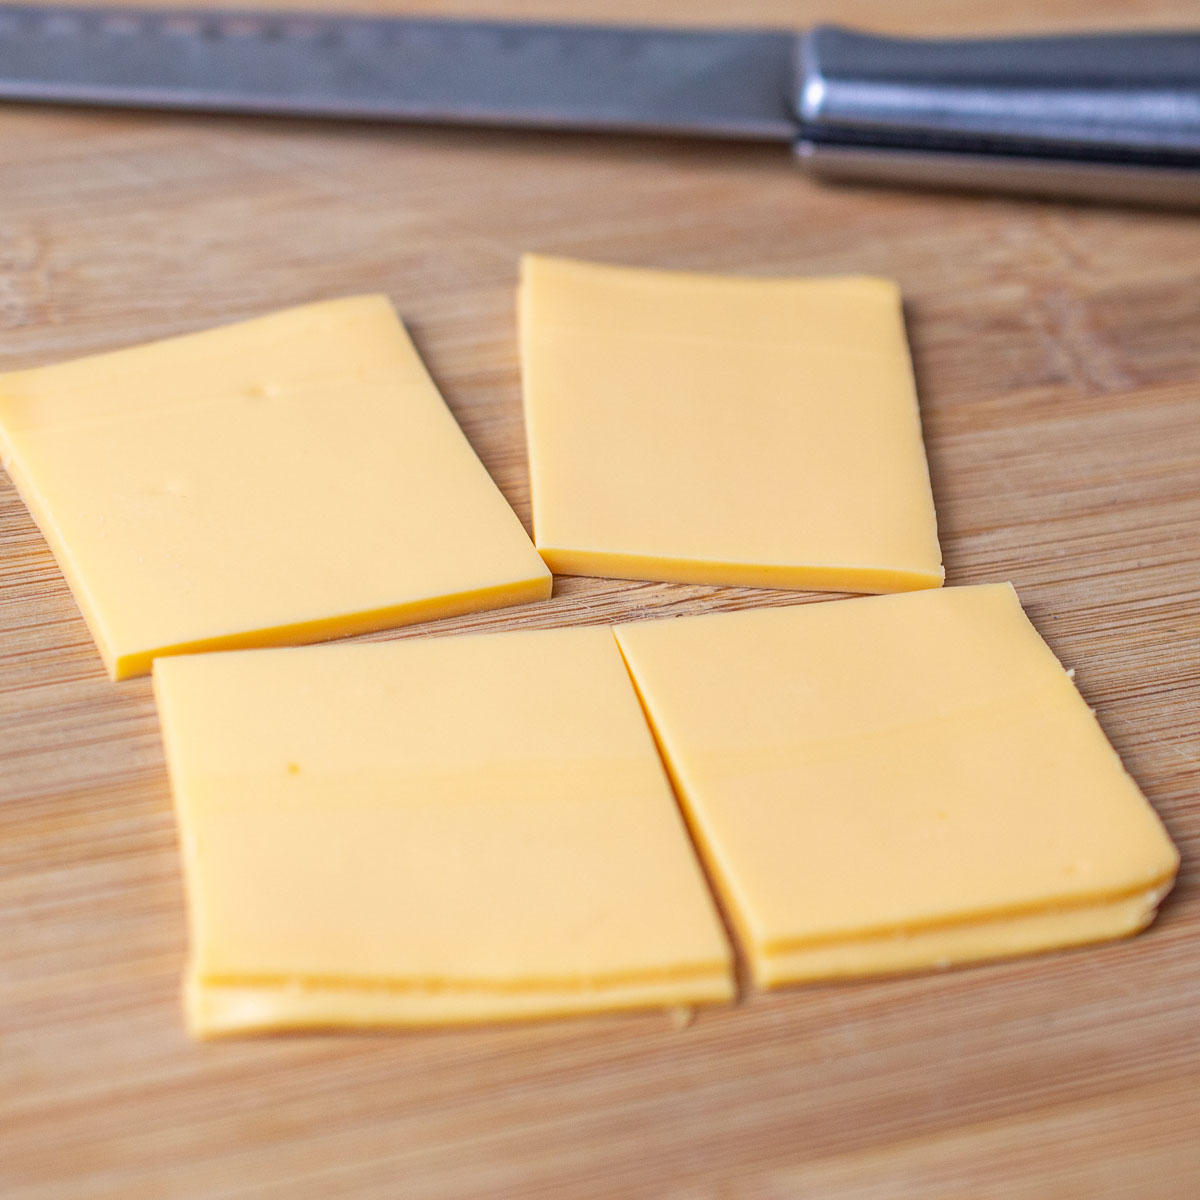 Slices of cheese cut into 4 squares